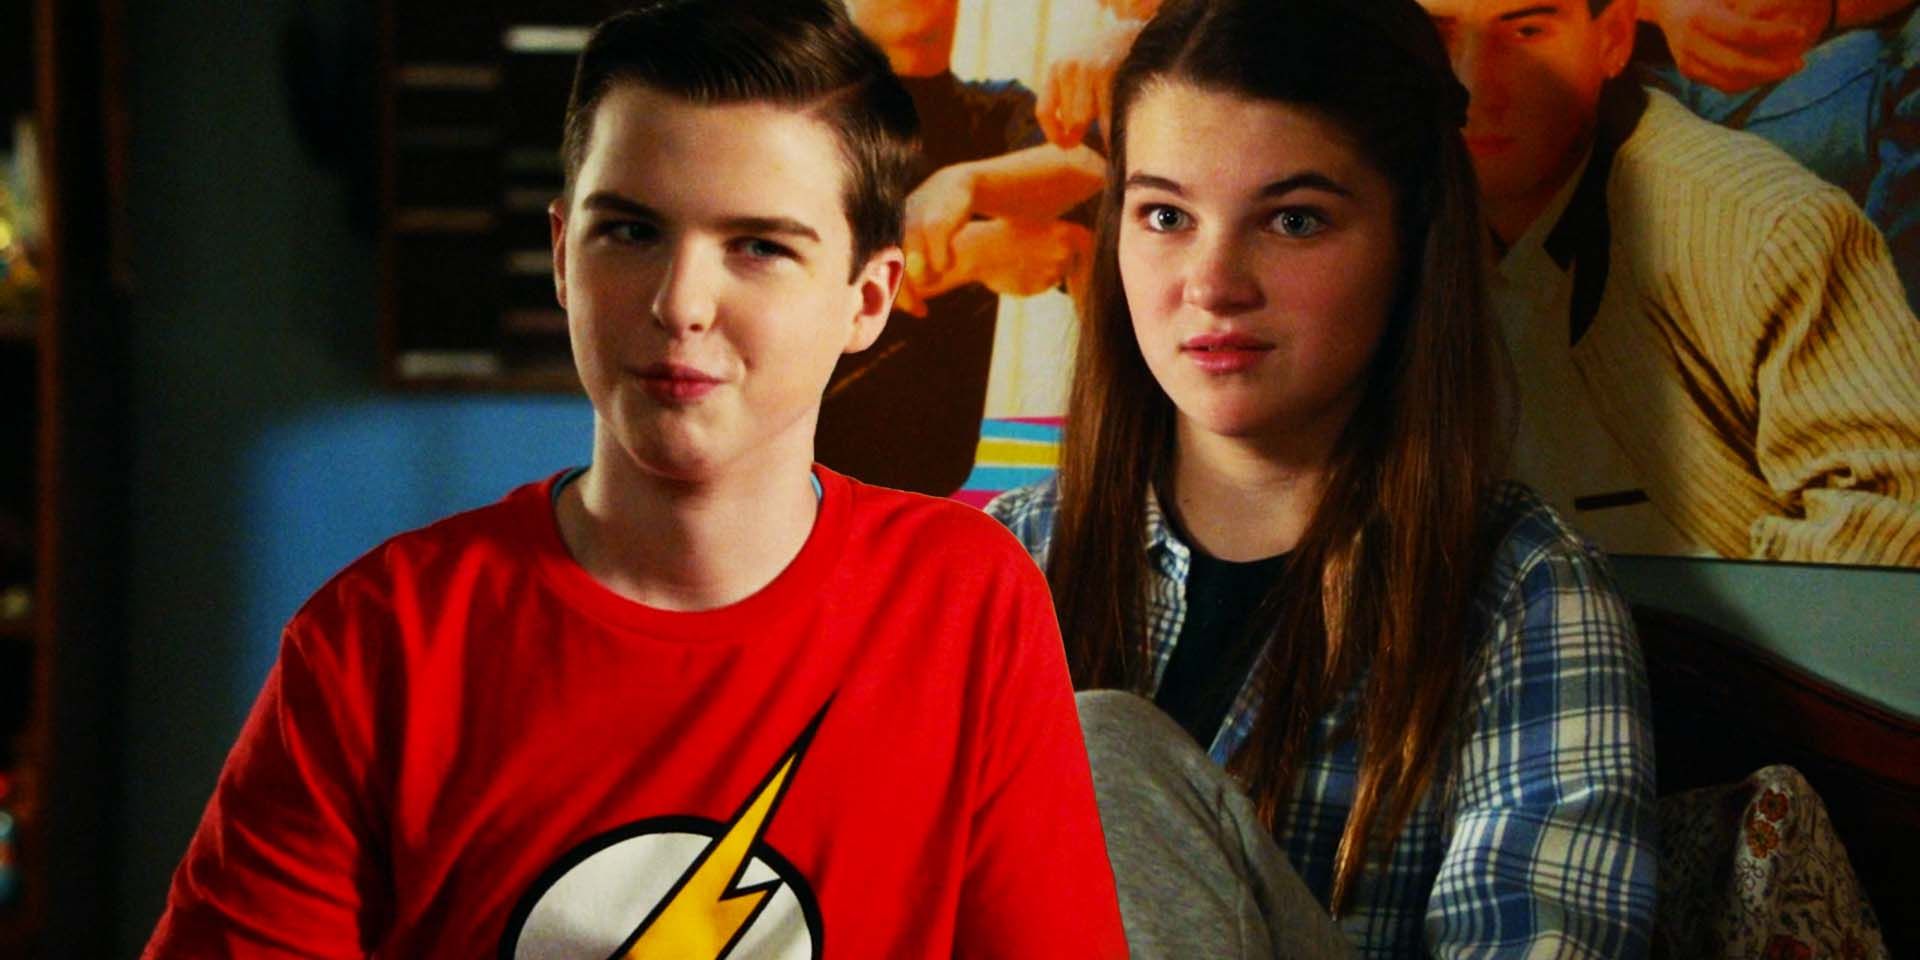 Iain Armitage as Sheldon Cooper and Raegan Revord as Missy Cooper in Young Sheldon S06 episode 17